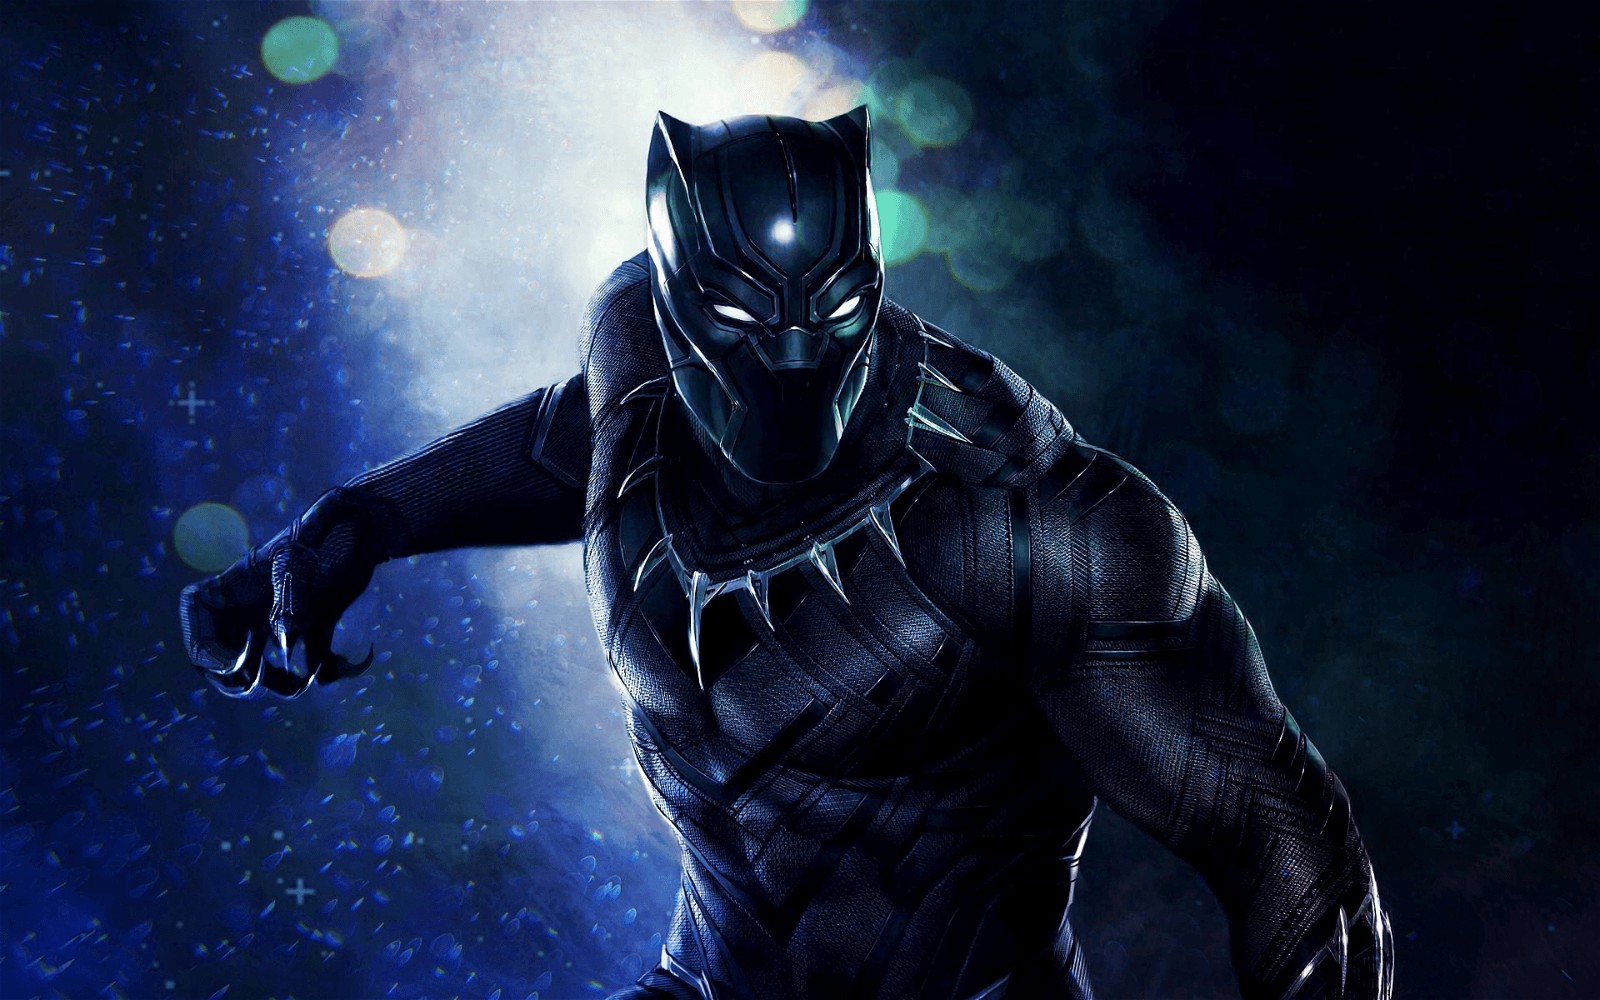 Black Panther - Avengers